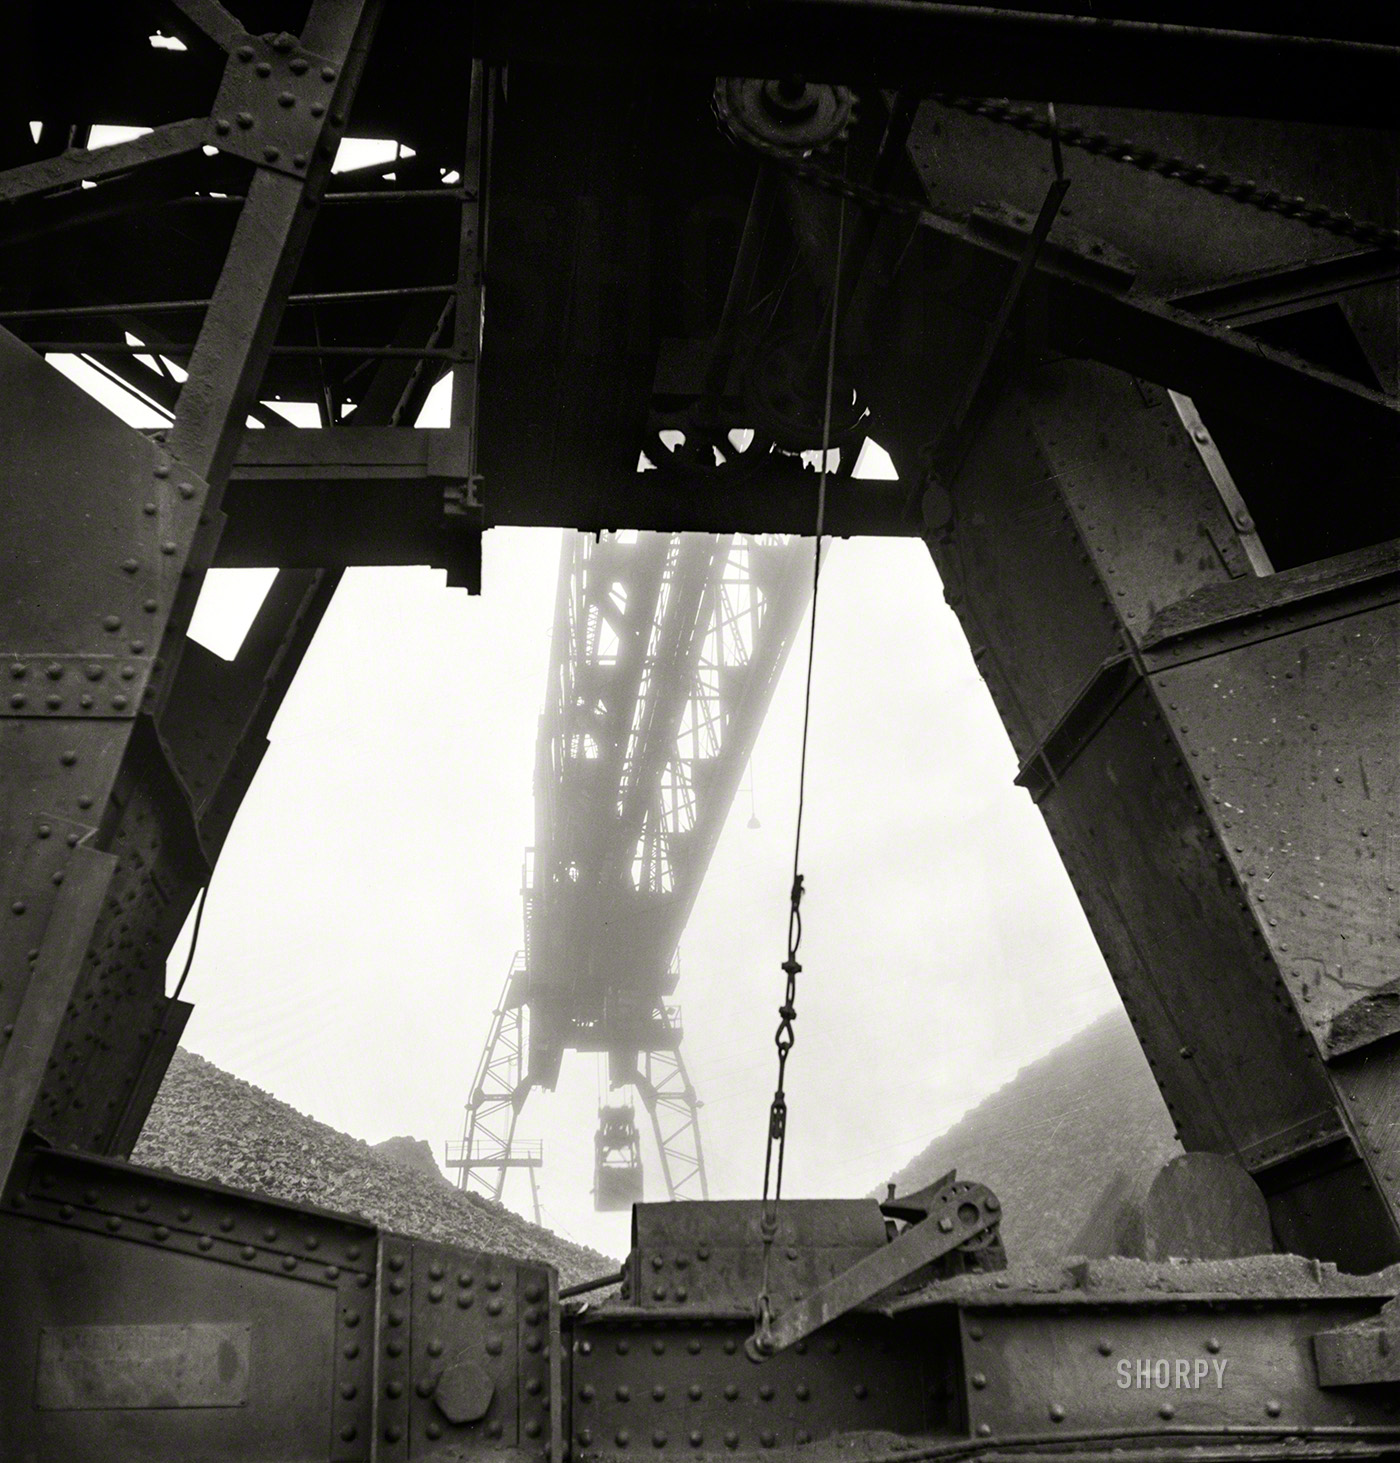 December 1942. "Bridge with five-ton coal bucket, Milwaukee Western Fuel Co." Photo by Jack Delano for the Office of War Information. View full size.